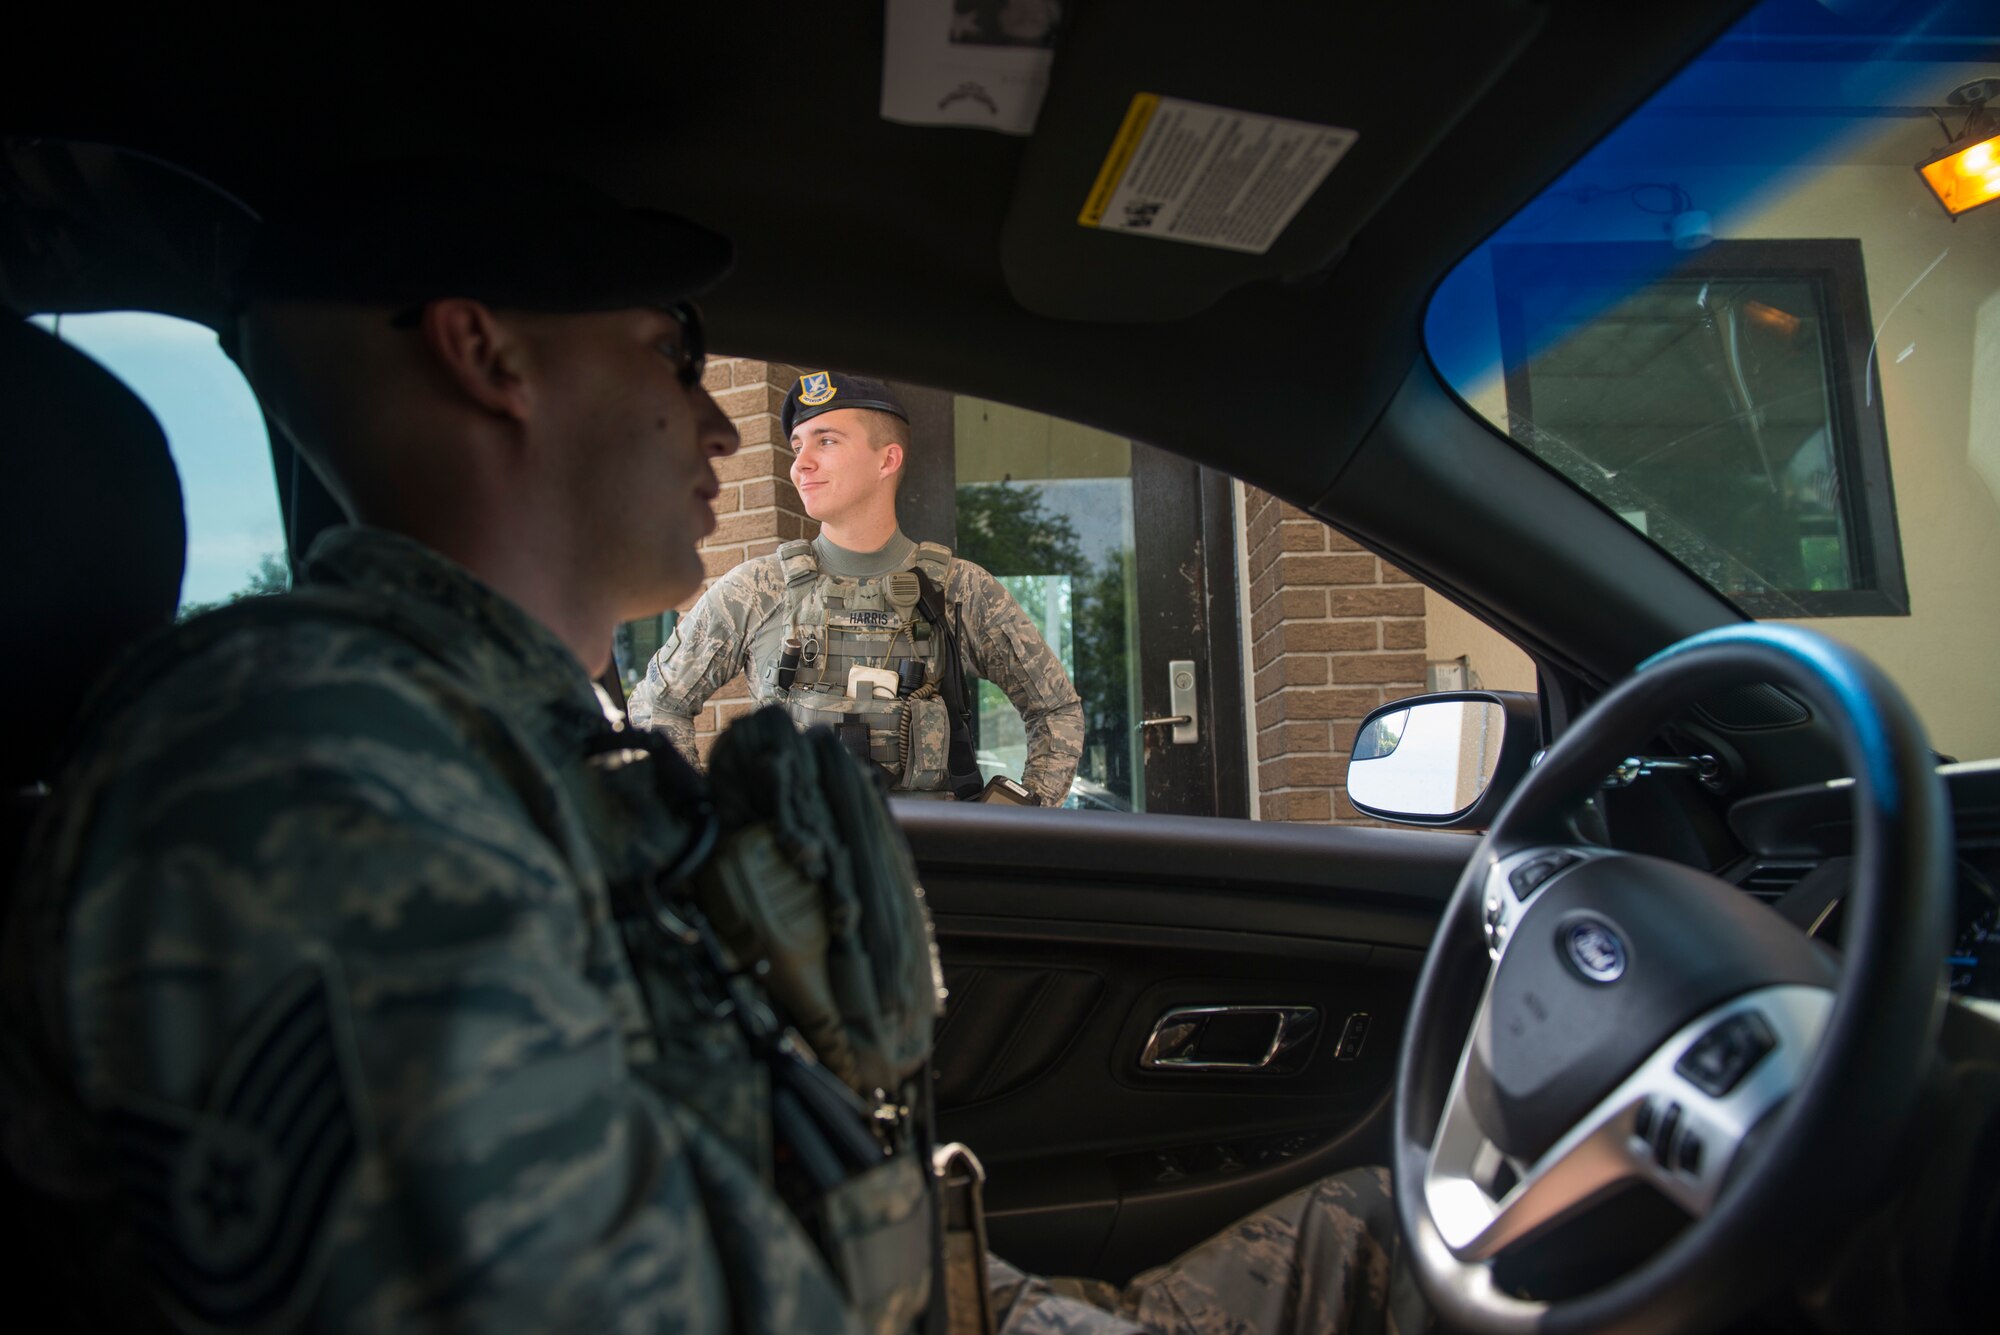 Tech. Sgt. Jarrod Kinard, 81st Security Forces Squadron flight chief, checks in on Airman Hunter Harris, 81st SFS entry controller, during a ride-along at Keesler Air Force Base, Miss., May 17, 2018. The ride-along program is part of the 81st SFS community involvement initiative where anyone, age 15 and up and with base access, can see what it's like to be a defender. If you are interested in the ride-along program, please contact Tech. Sgt. Matthew Oleson at 228-376-6601. (U.S. Air Force photo by Senior Airman Travis Beihl)